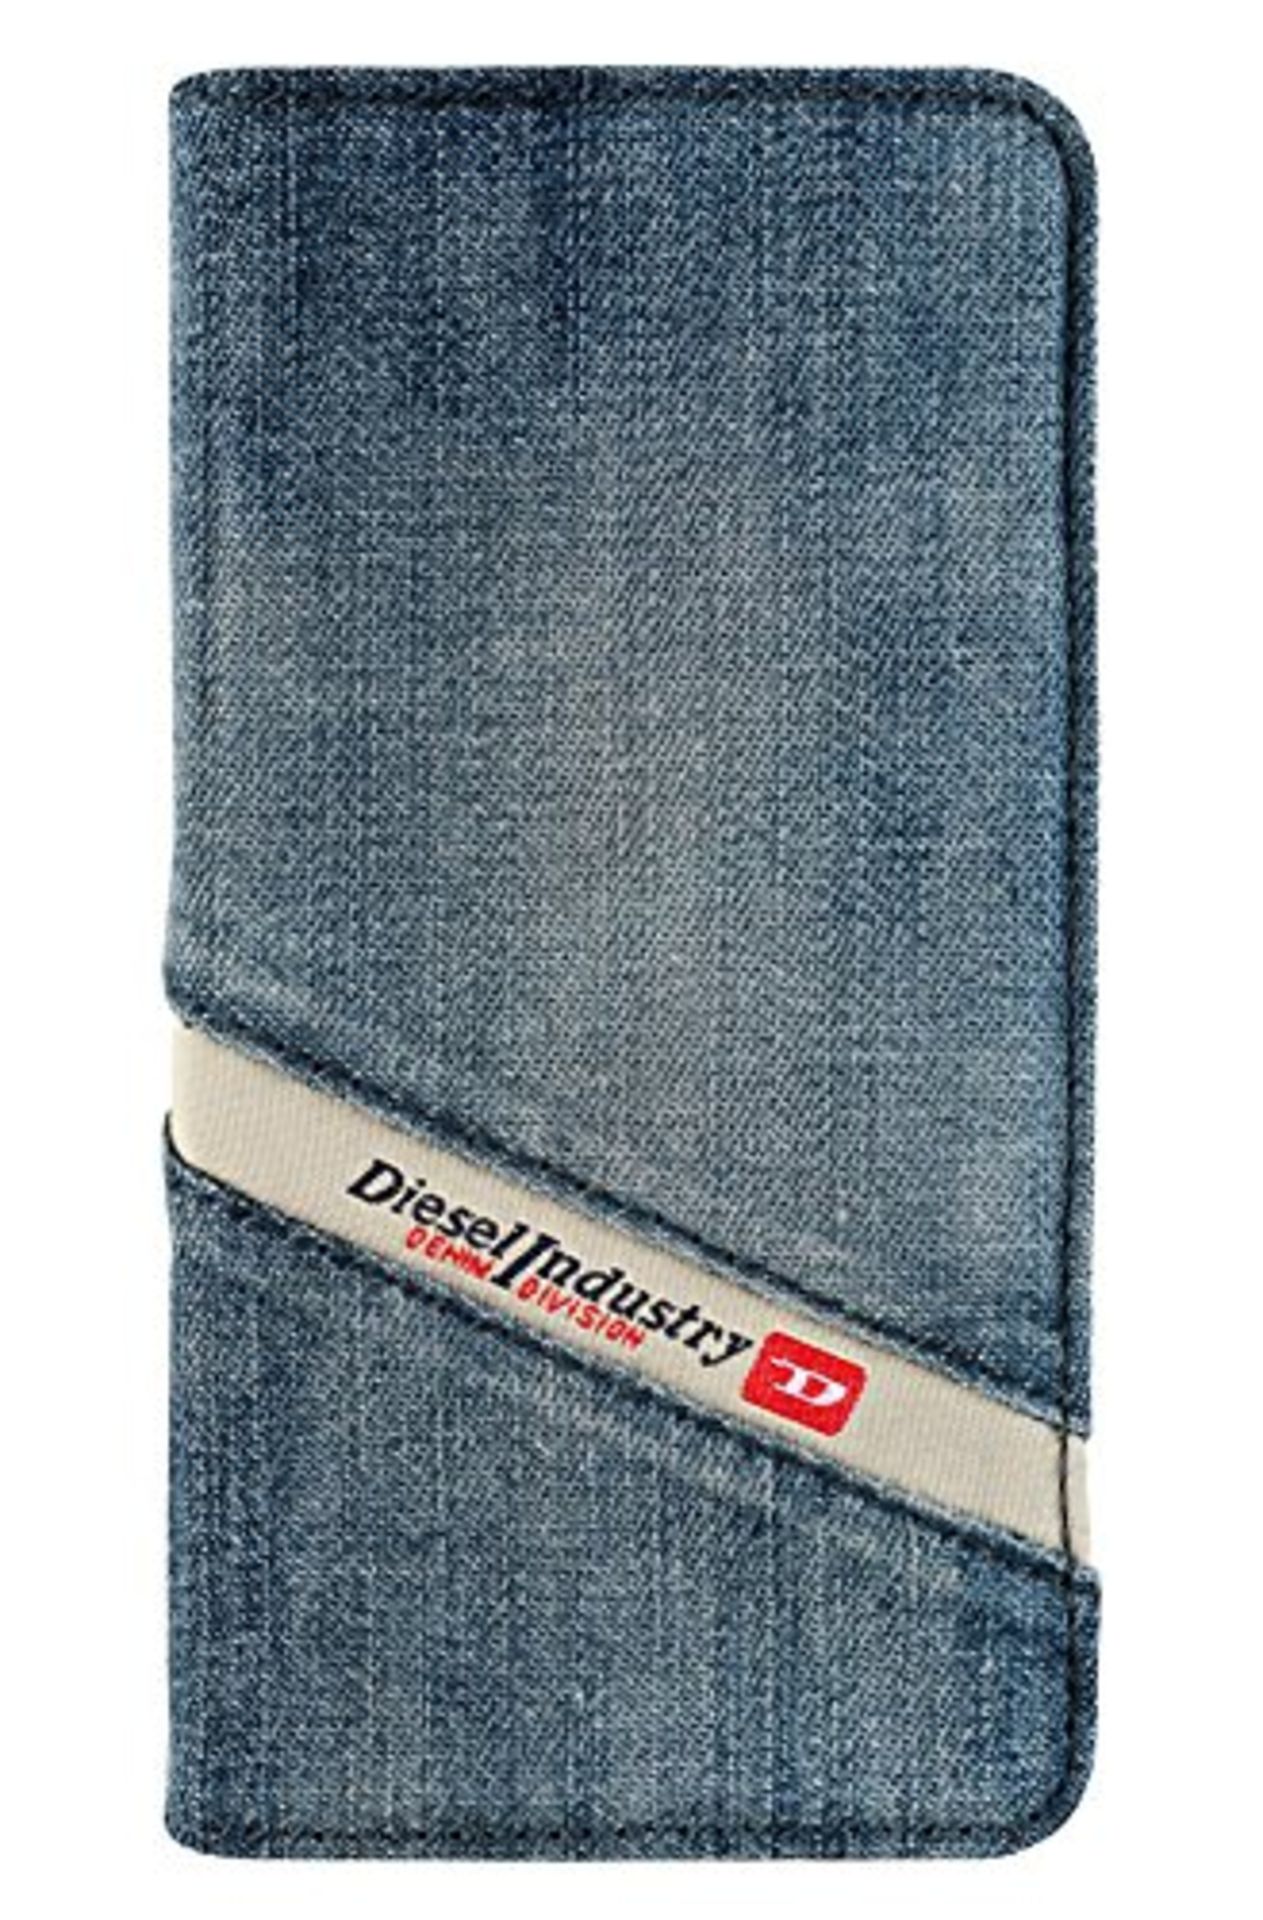 V *TRADE QTY* Brand New Diesel Cosmo Booklet Case For iPhone 6/6S Amazon Price £24.99 Argos Price £